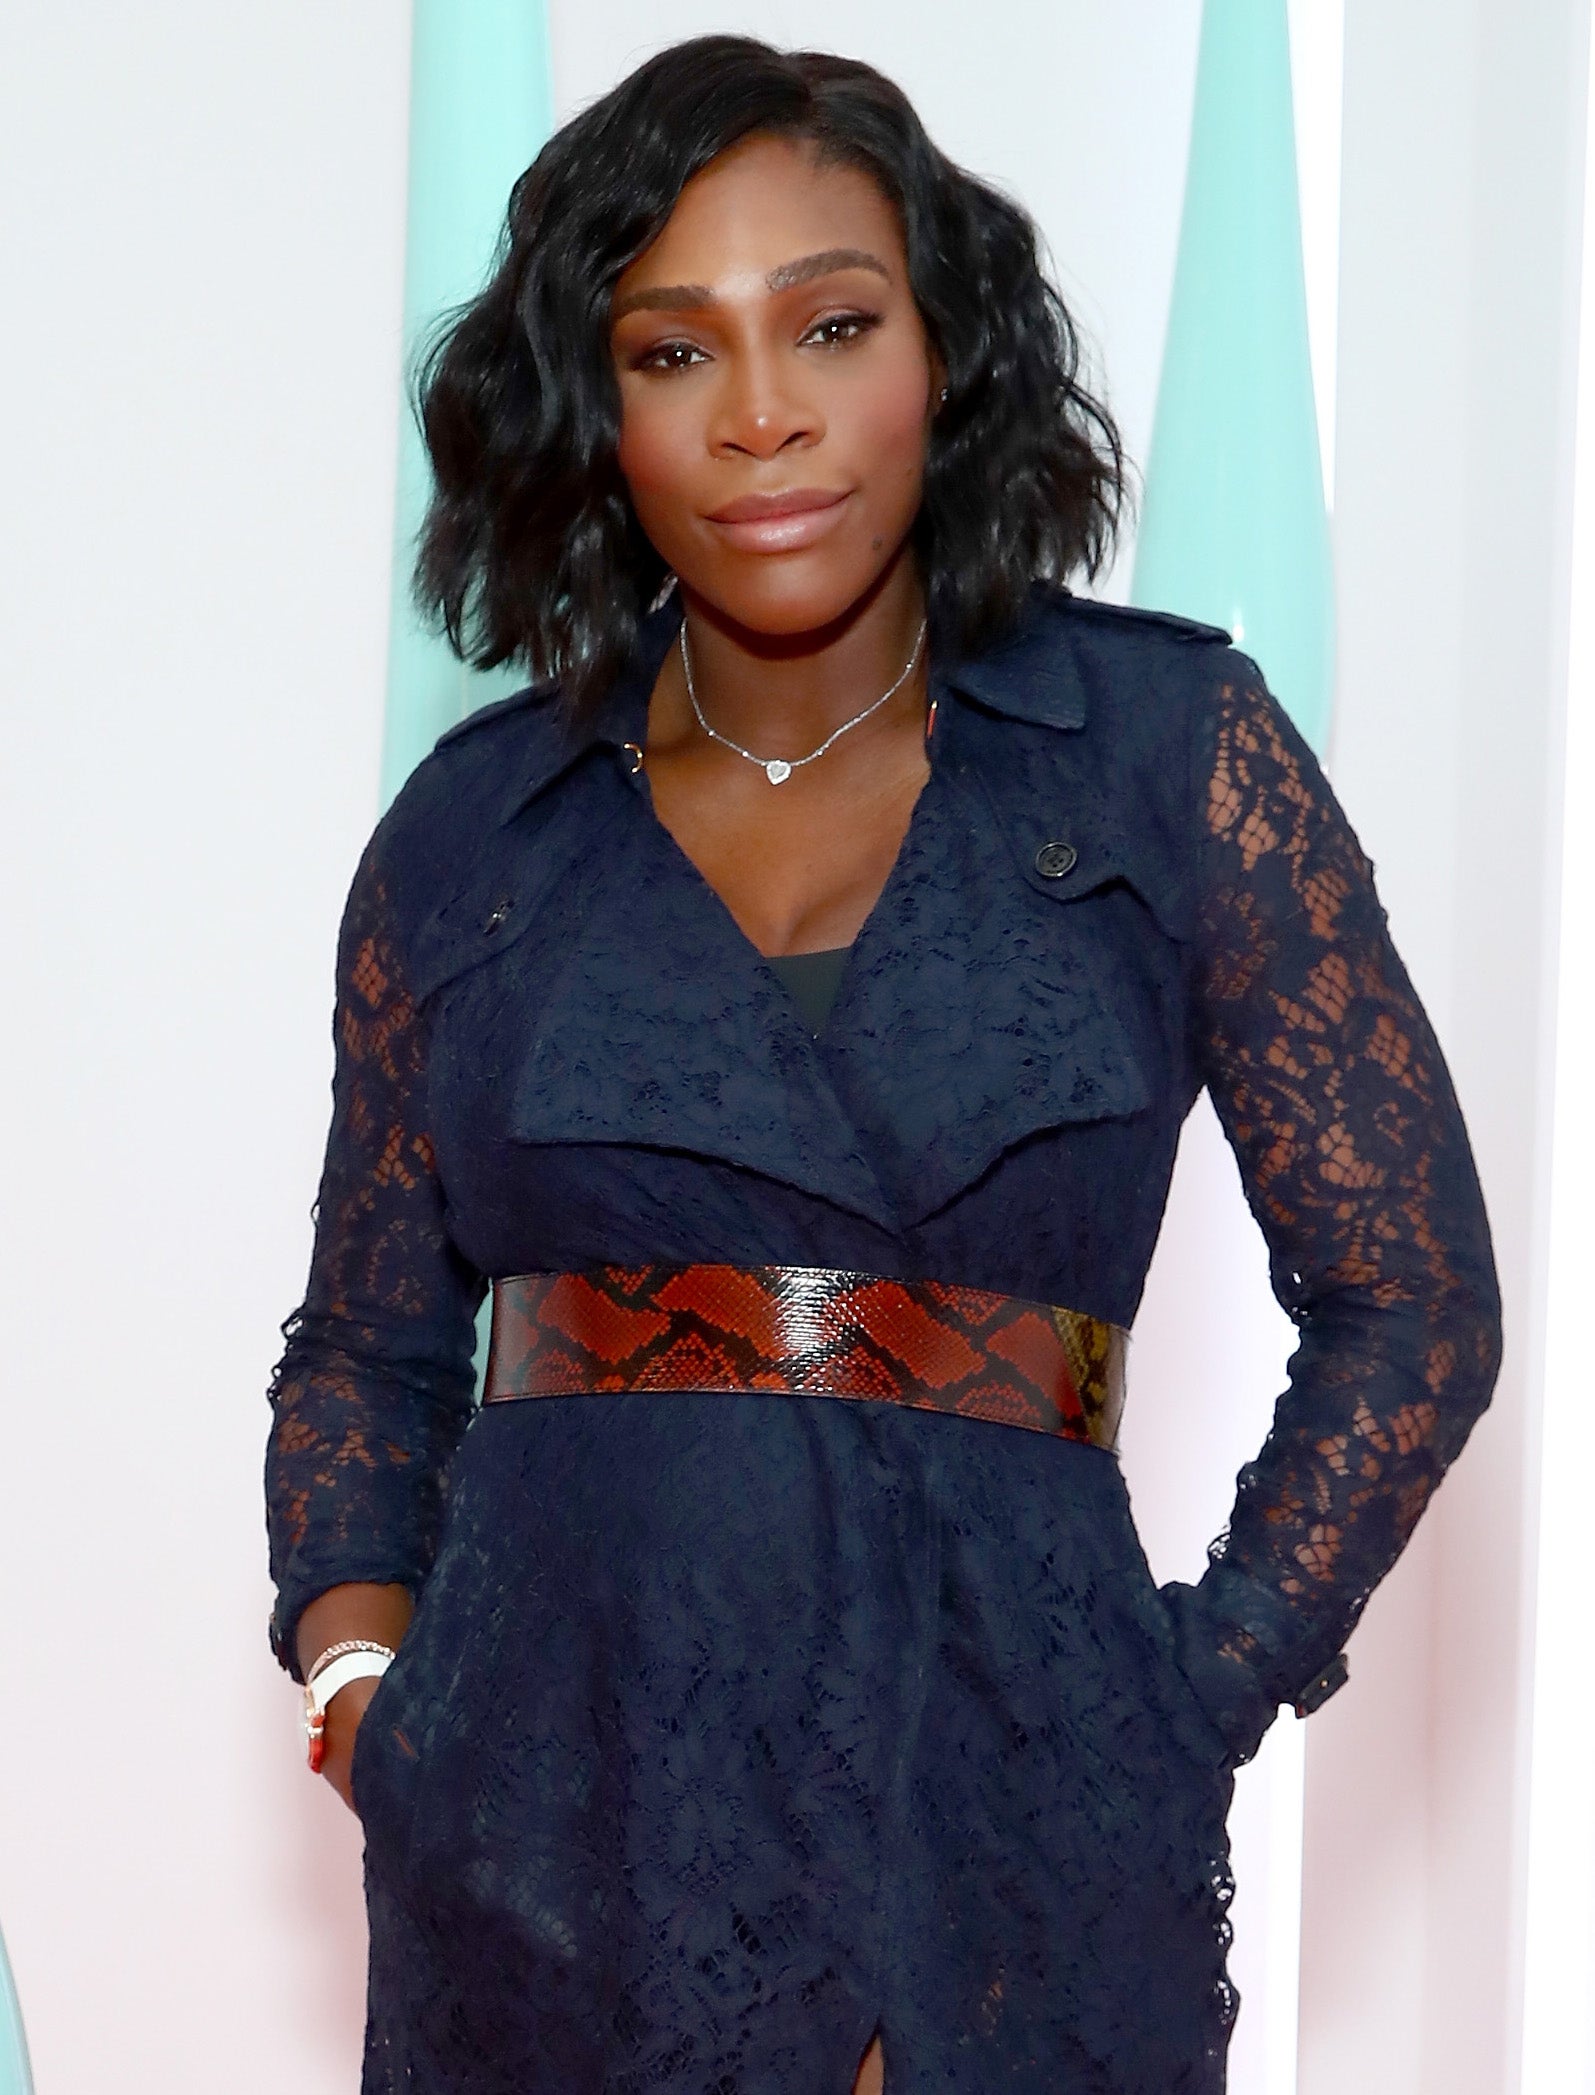 Serena Williams Shares A First Look At Her Wedding Dress
